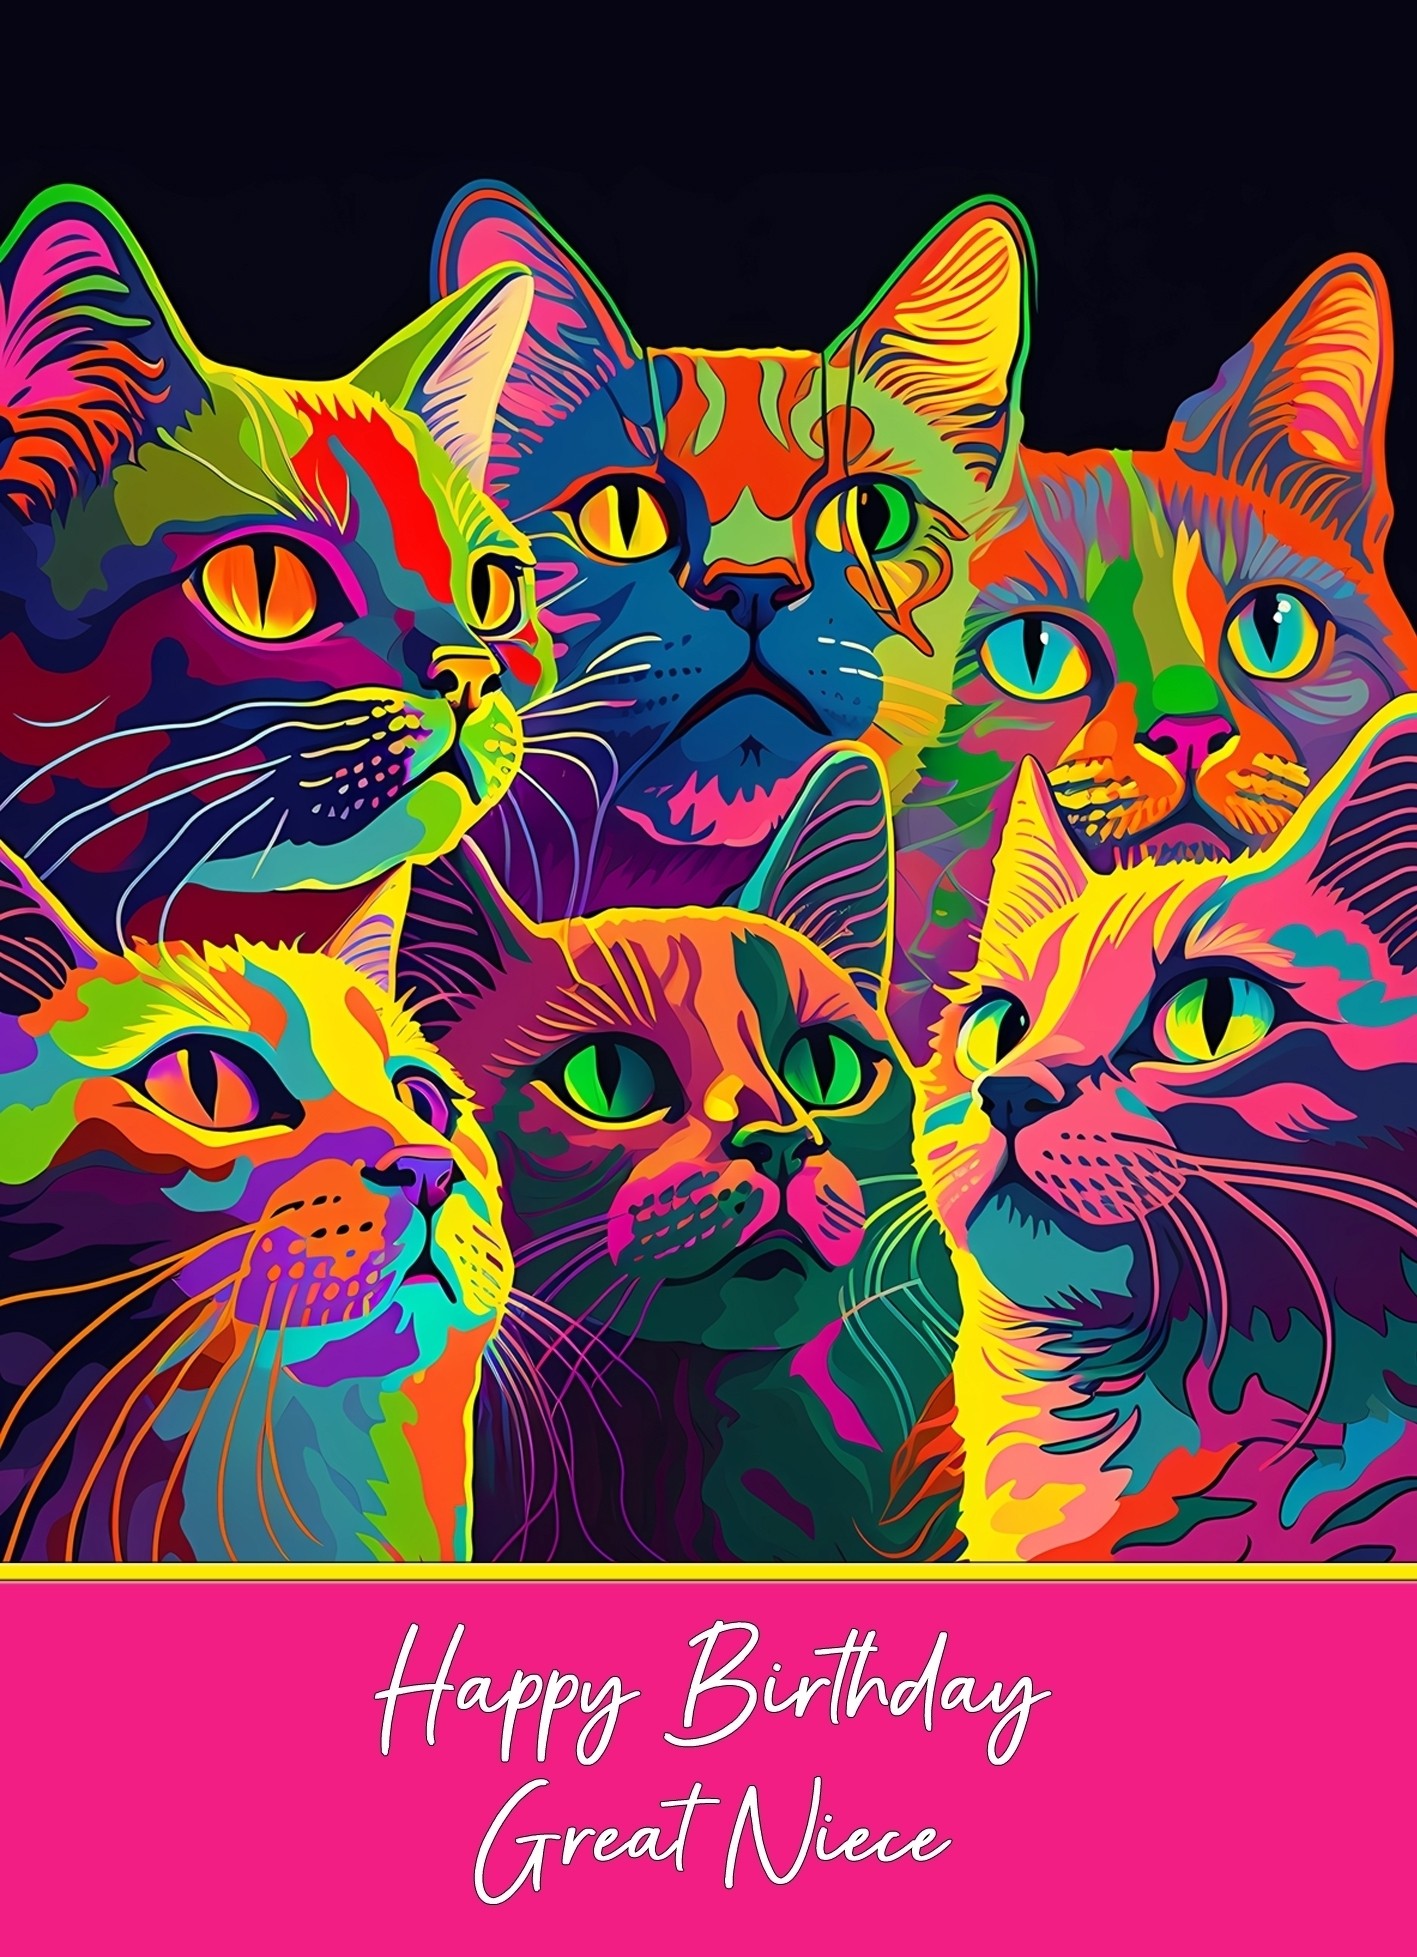 Birthday Card For Great Niece (Colourful Cat Art)